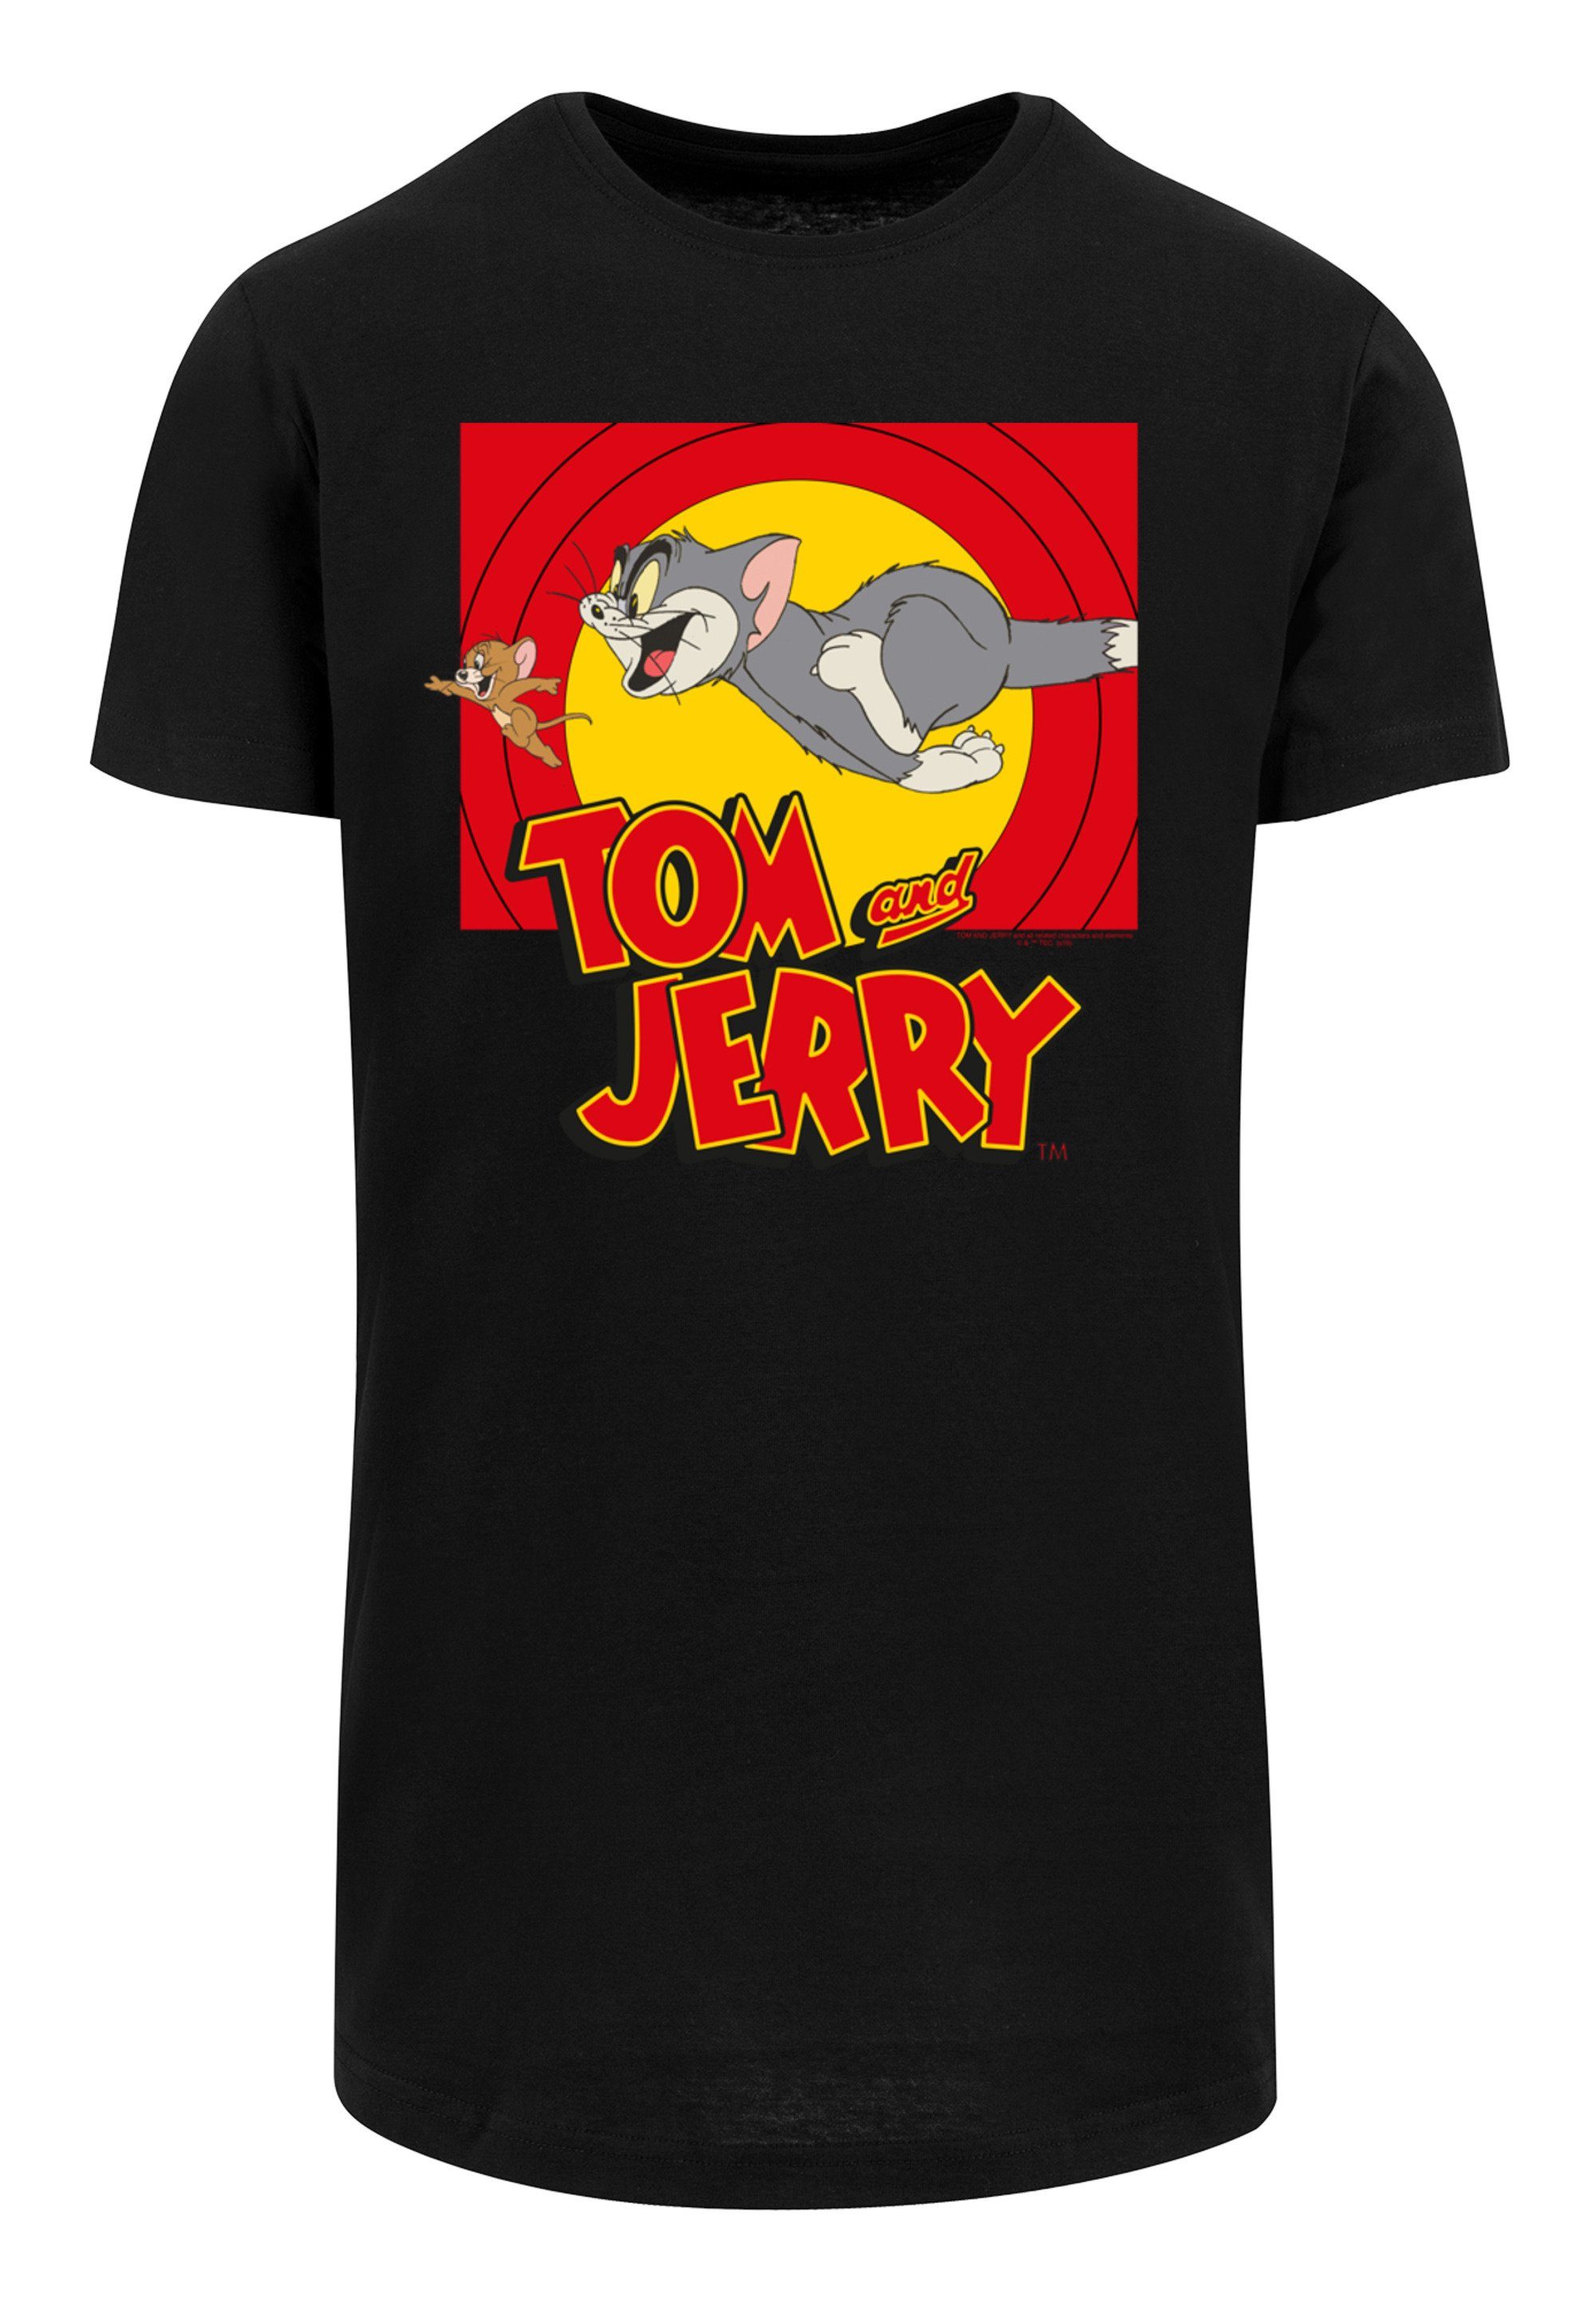 F4NT4STIC T-Shirt Tom and Jerry Scene schwarz Serie TV Print Chase